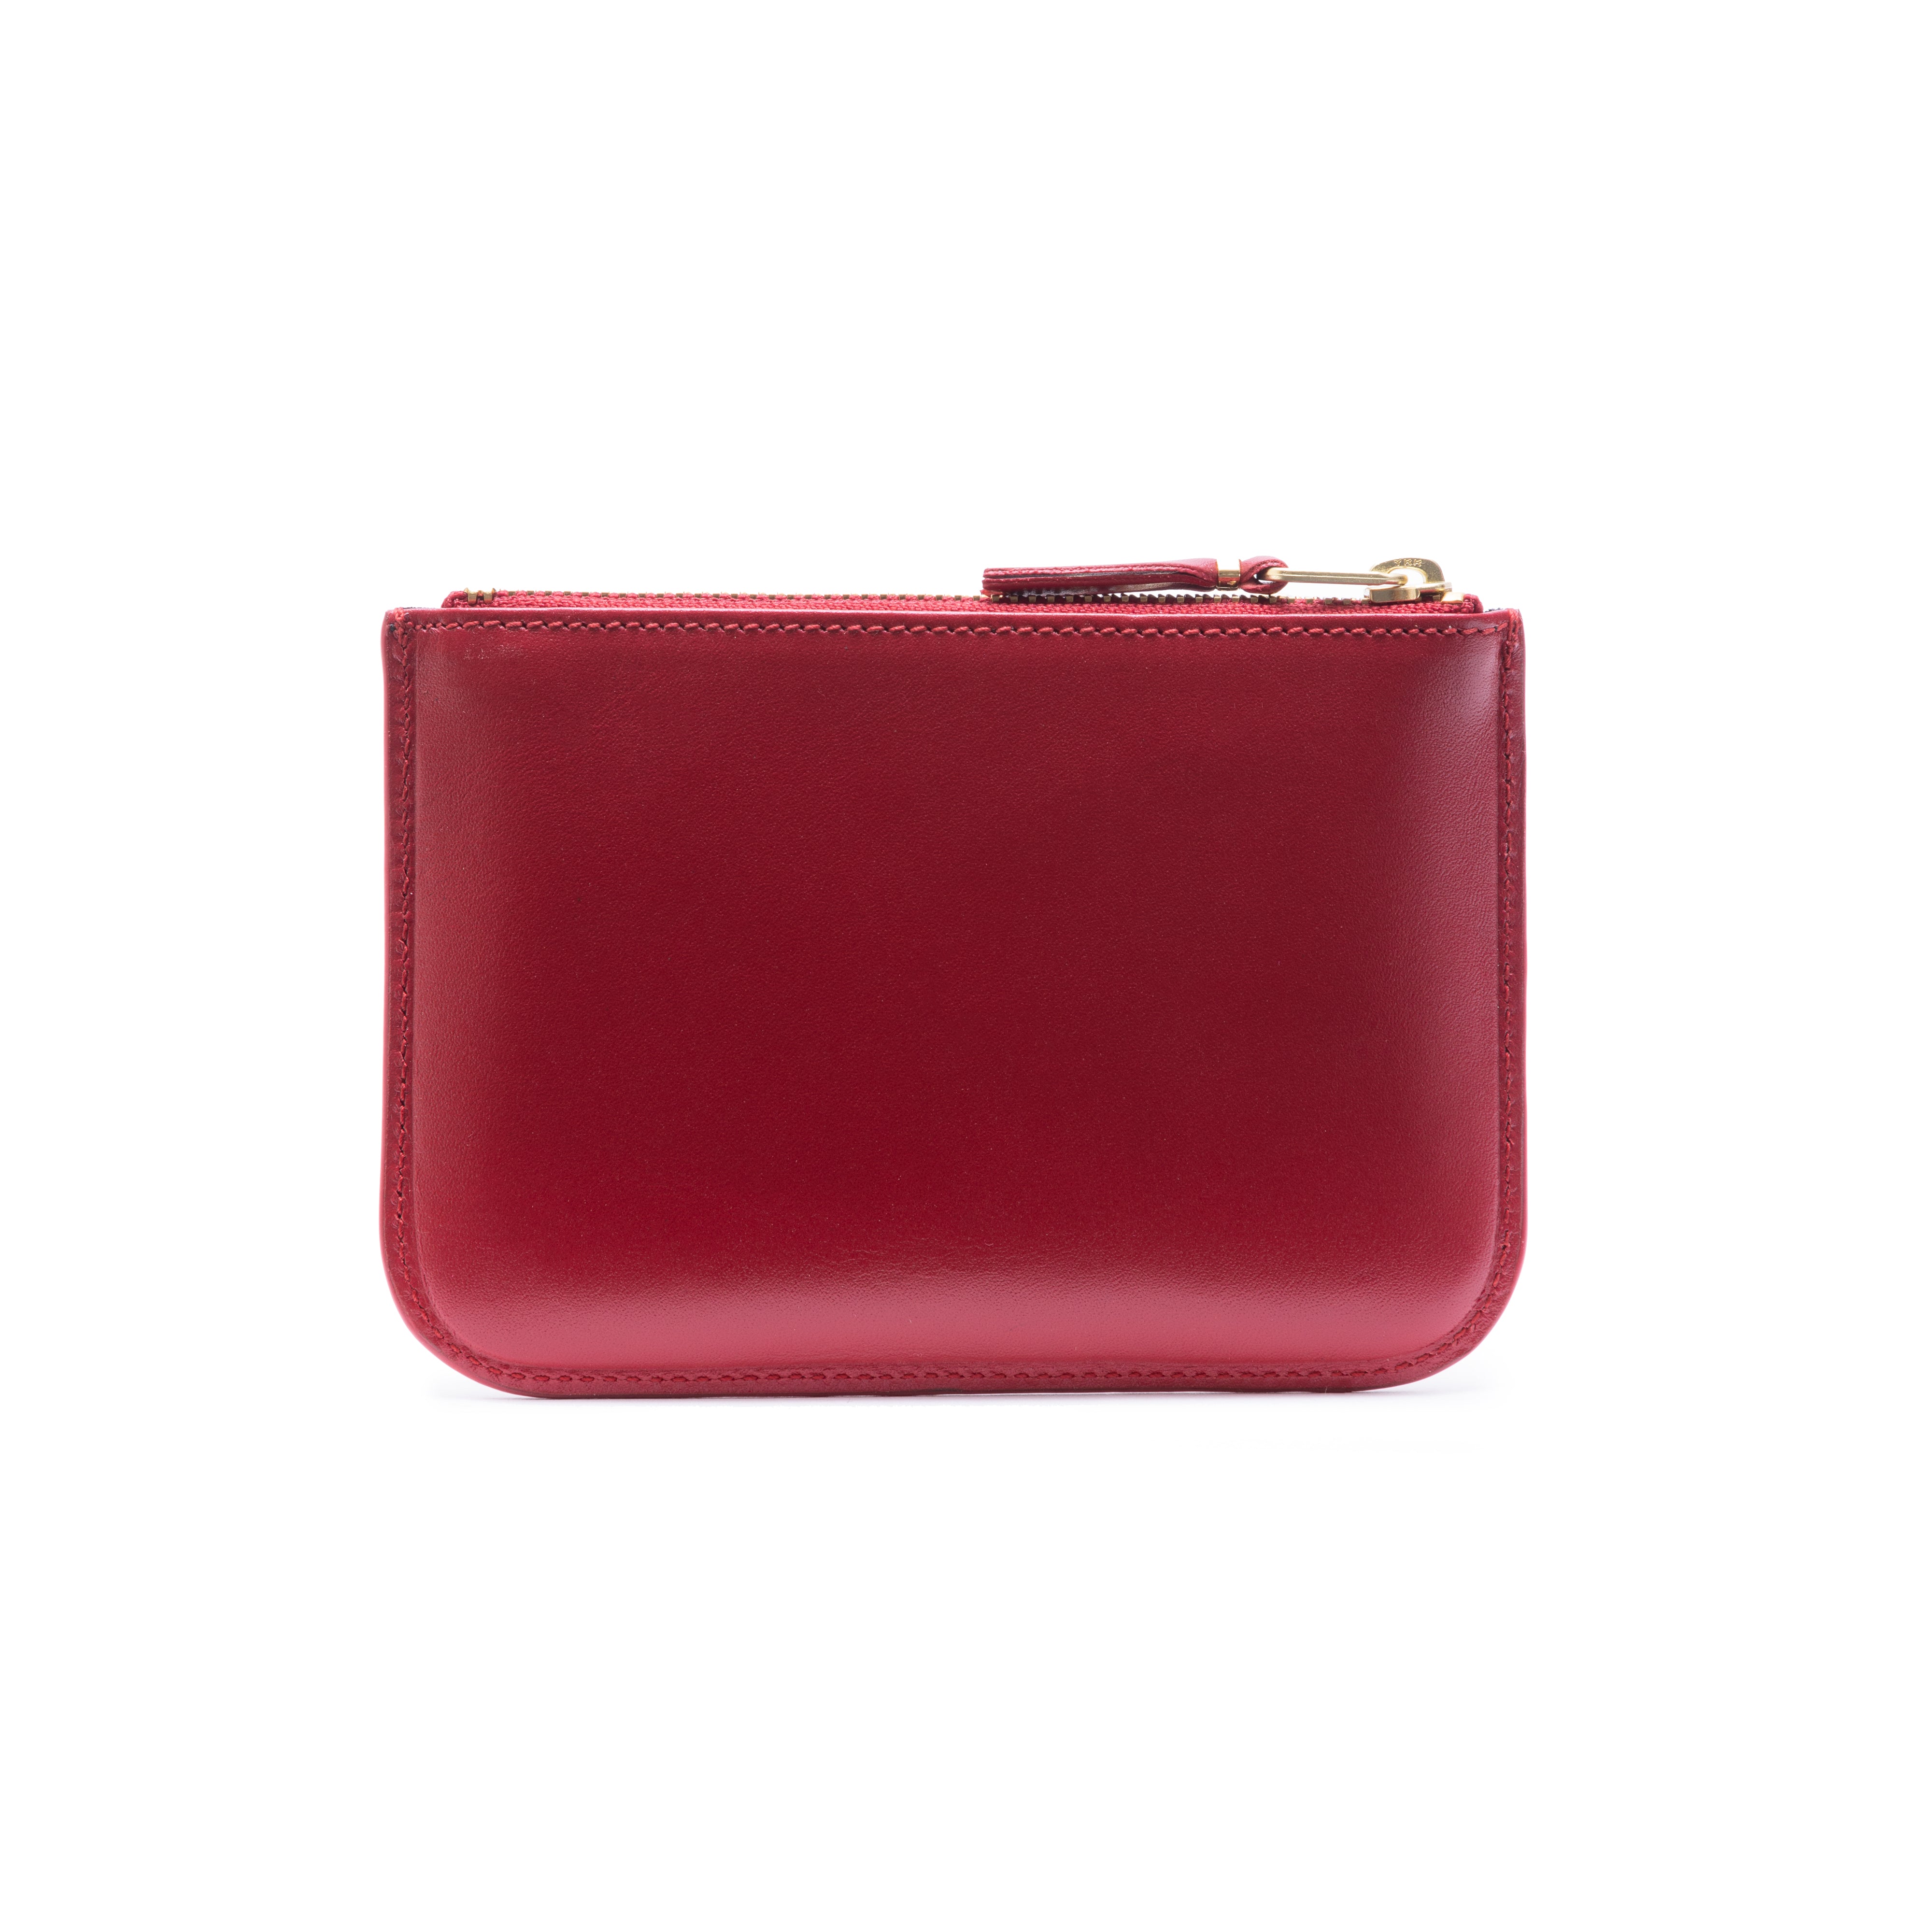 CDG WALLET - Classic Leather Outside Pocket Wallet - (8Z-X081 Red 